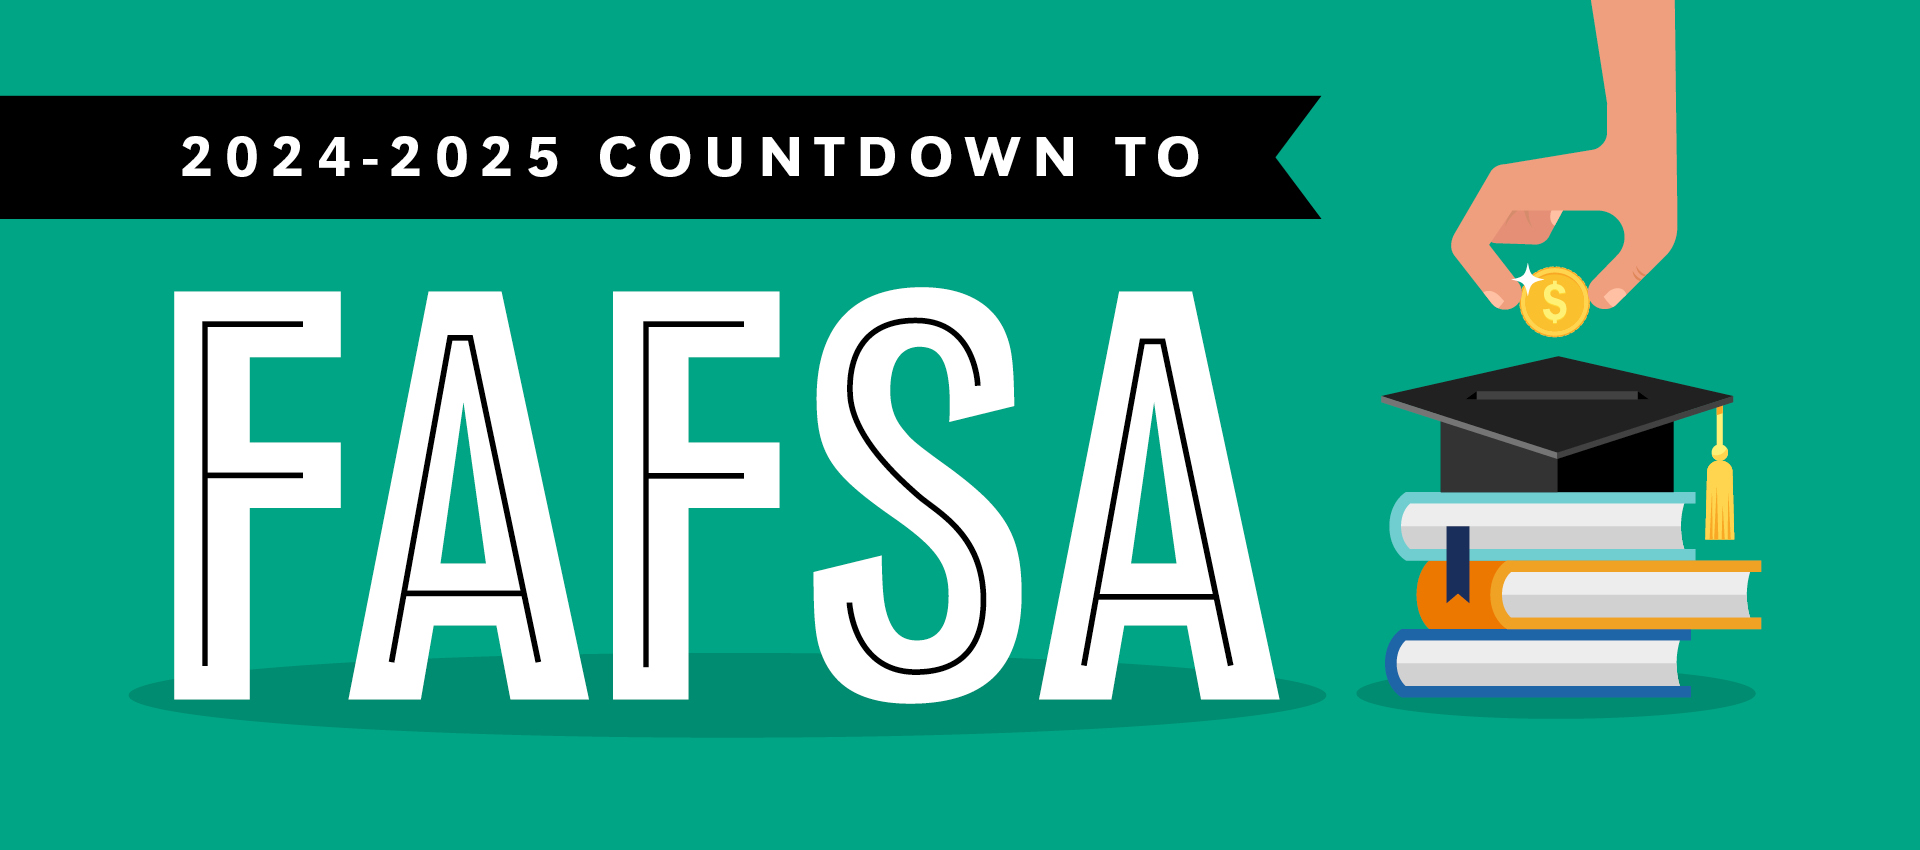 Illustrated graphic advertising deadline for FAFSA. There is a stack of a books with a graduation cap designed to be a piggy bank sitting on top and a hand holding a coin placing it in the cap.